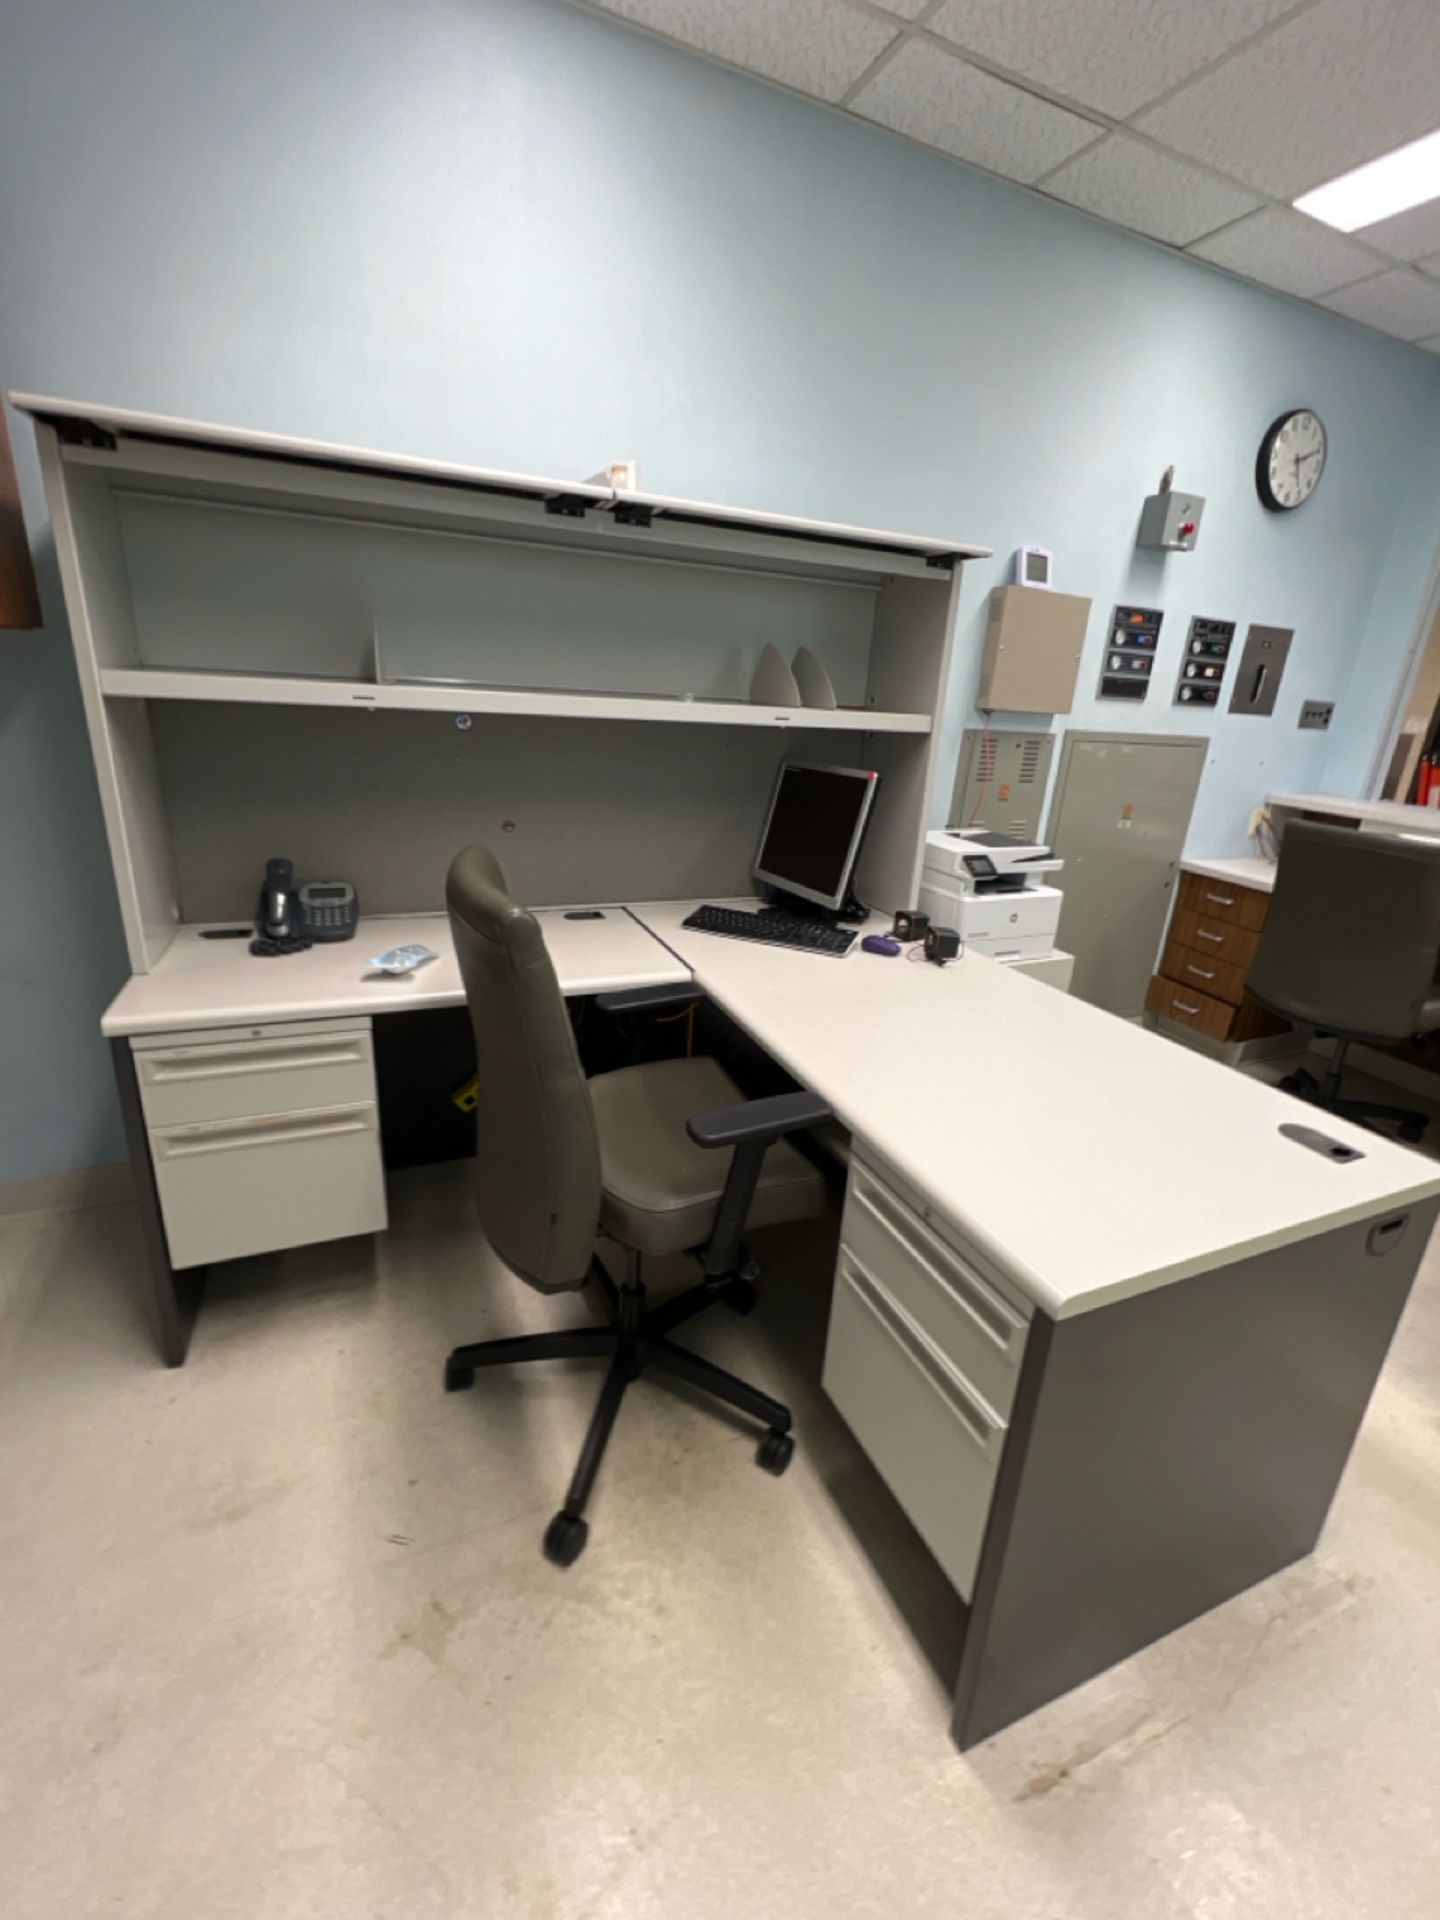 OFFICE TO INCLUDE: L-DESK WITH OVERHEAD STORAGE, HP LASERJET PRO MFP M428FDN PRINTER, FILE CABINETS, - Image 4 of 6